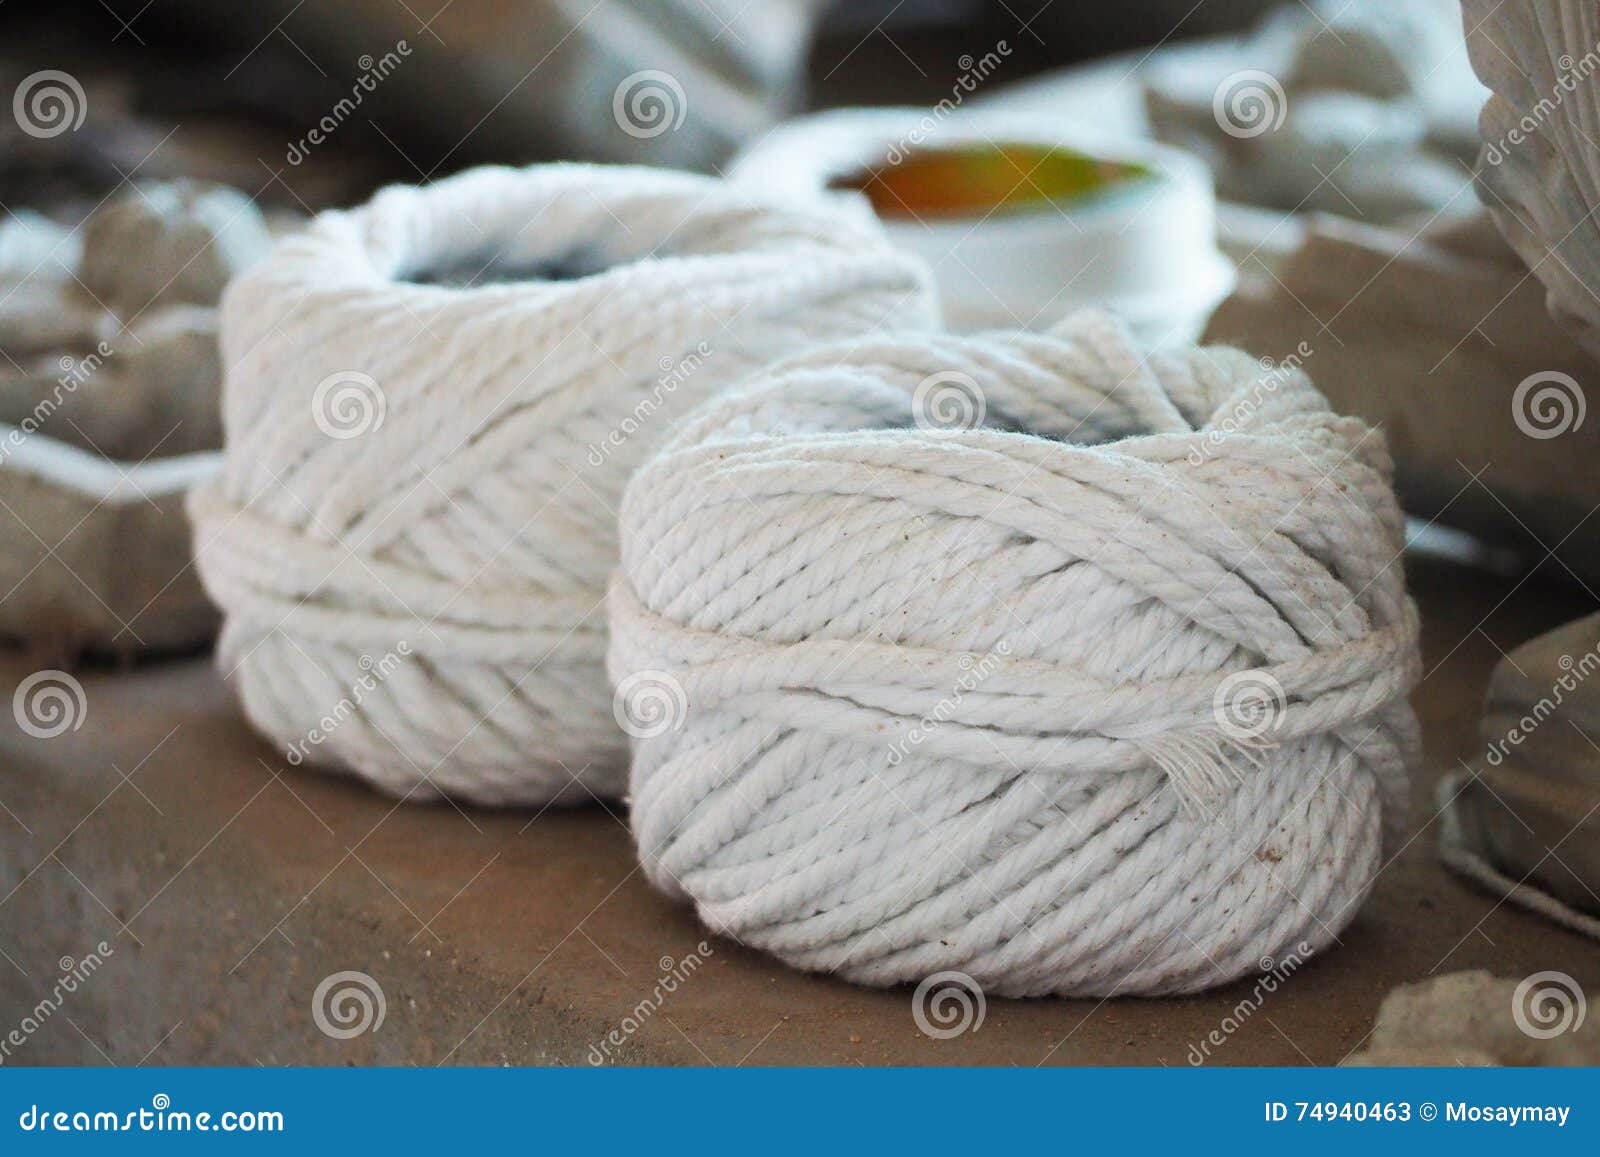 https://thumbs.dreamstime.com/z/white-cotton-rope-crafts-accessories-74940463.jpg